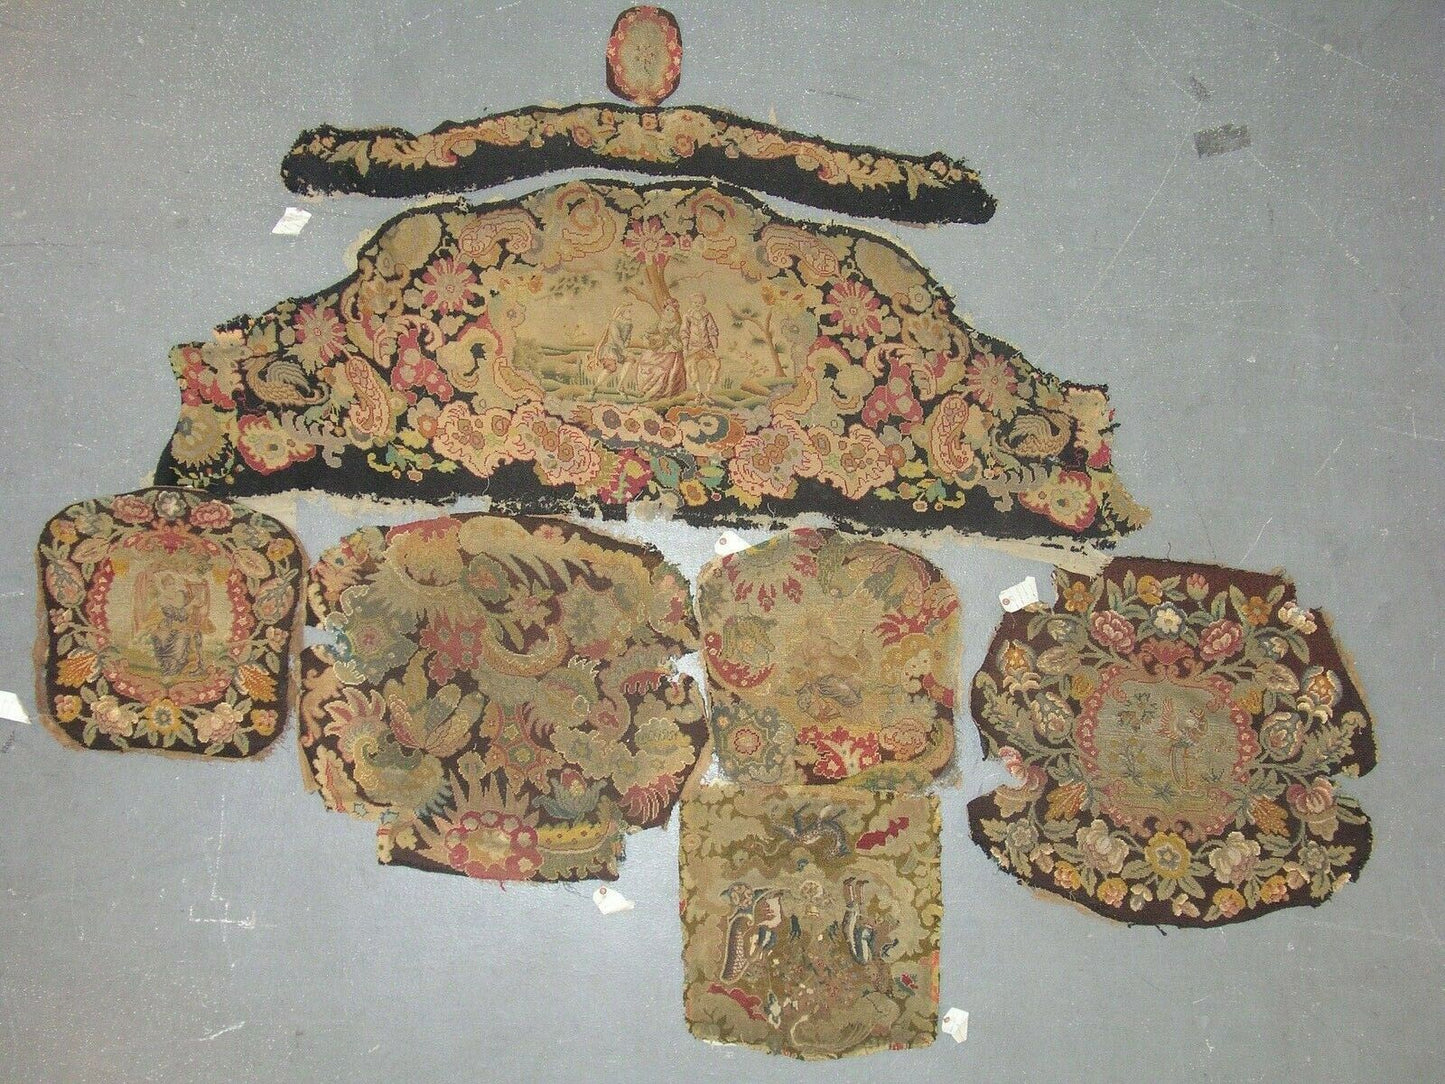 Antique 8 Piece French Seat Cover Set, circa 1900